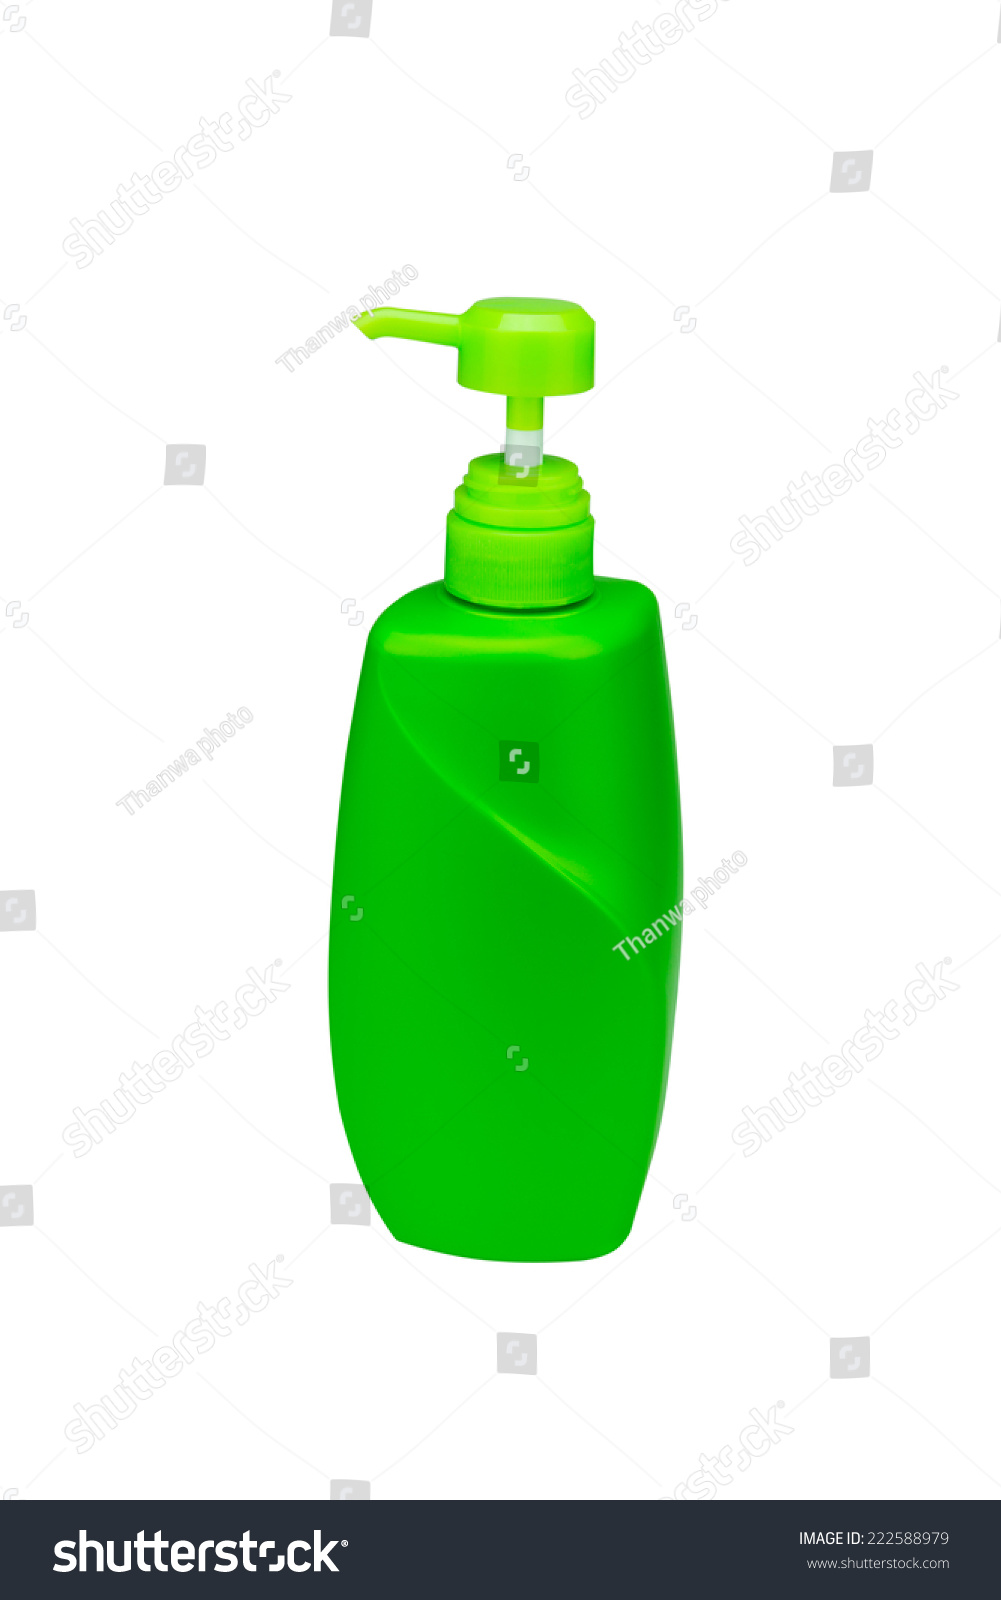 Download Yellow Green Pump Bottle Isolated On Stock Photo Edit Now 222588979 PSD Mockup Templates